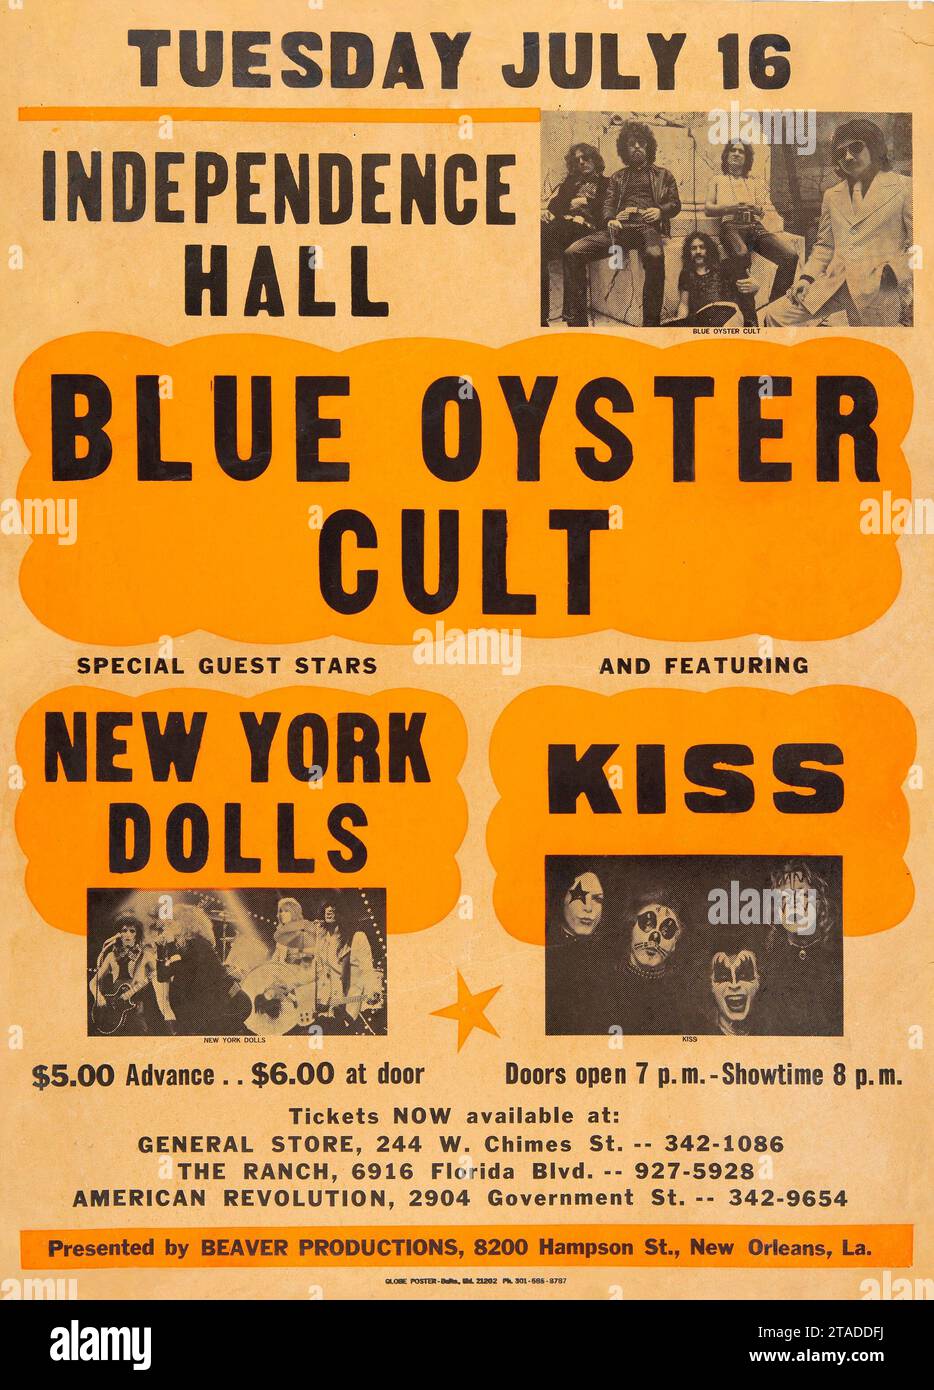 KISS, New York Dolls, Blue Oyster Cult - 1974 Baton Rouge, LA Globe Concert Poster. Indepence Hall. Stock Photo